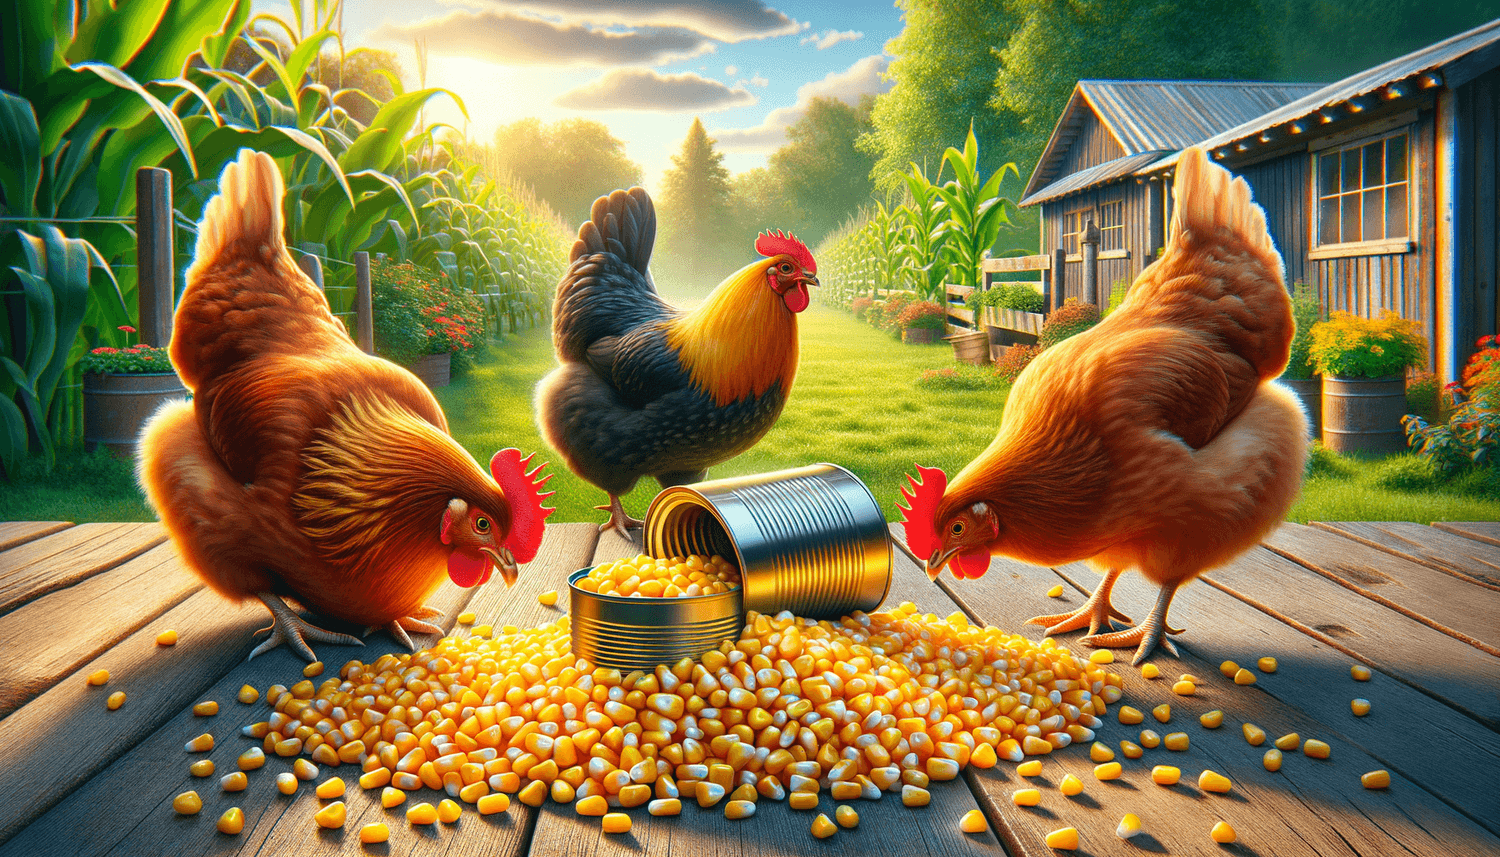 Can Chickens Eat Canned Corn?